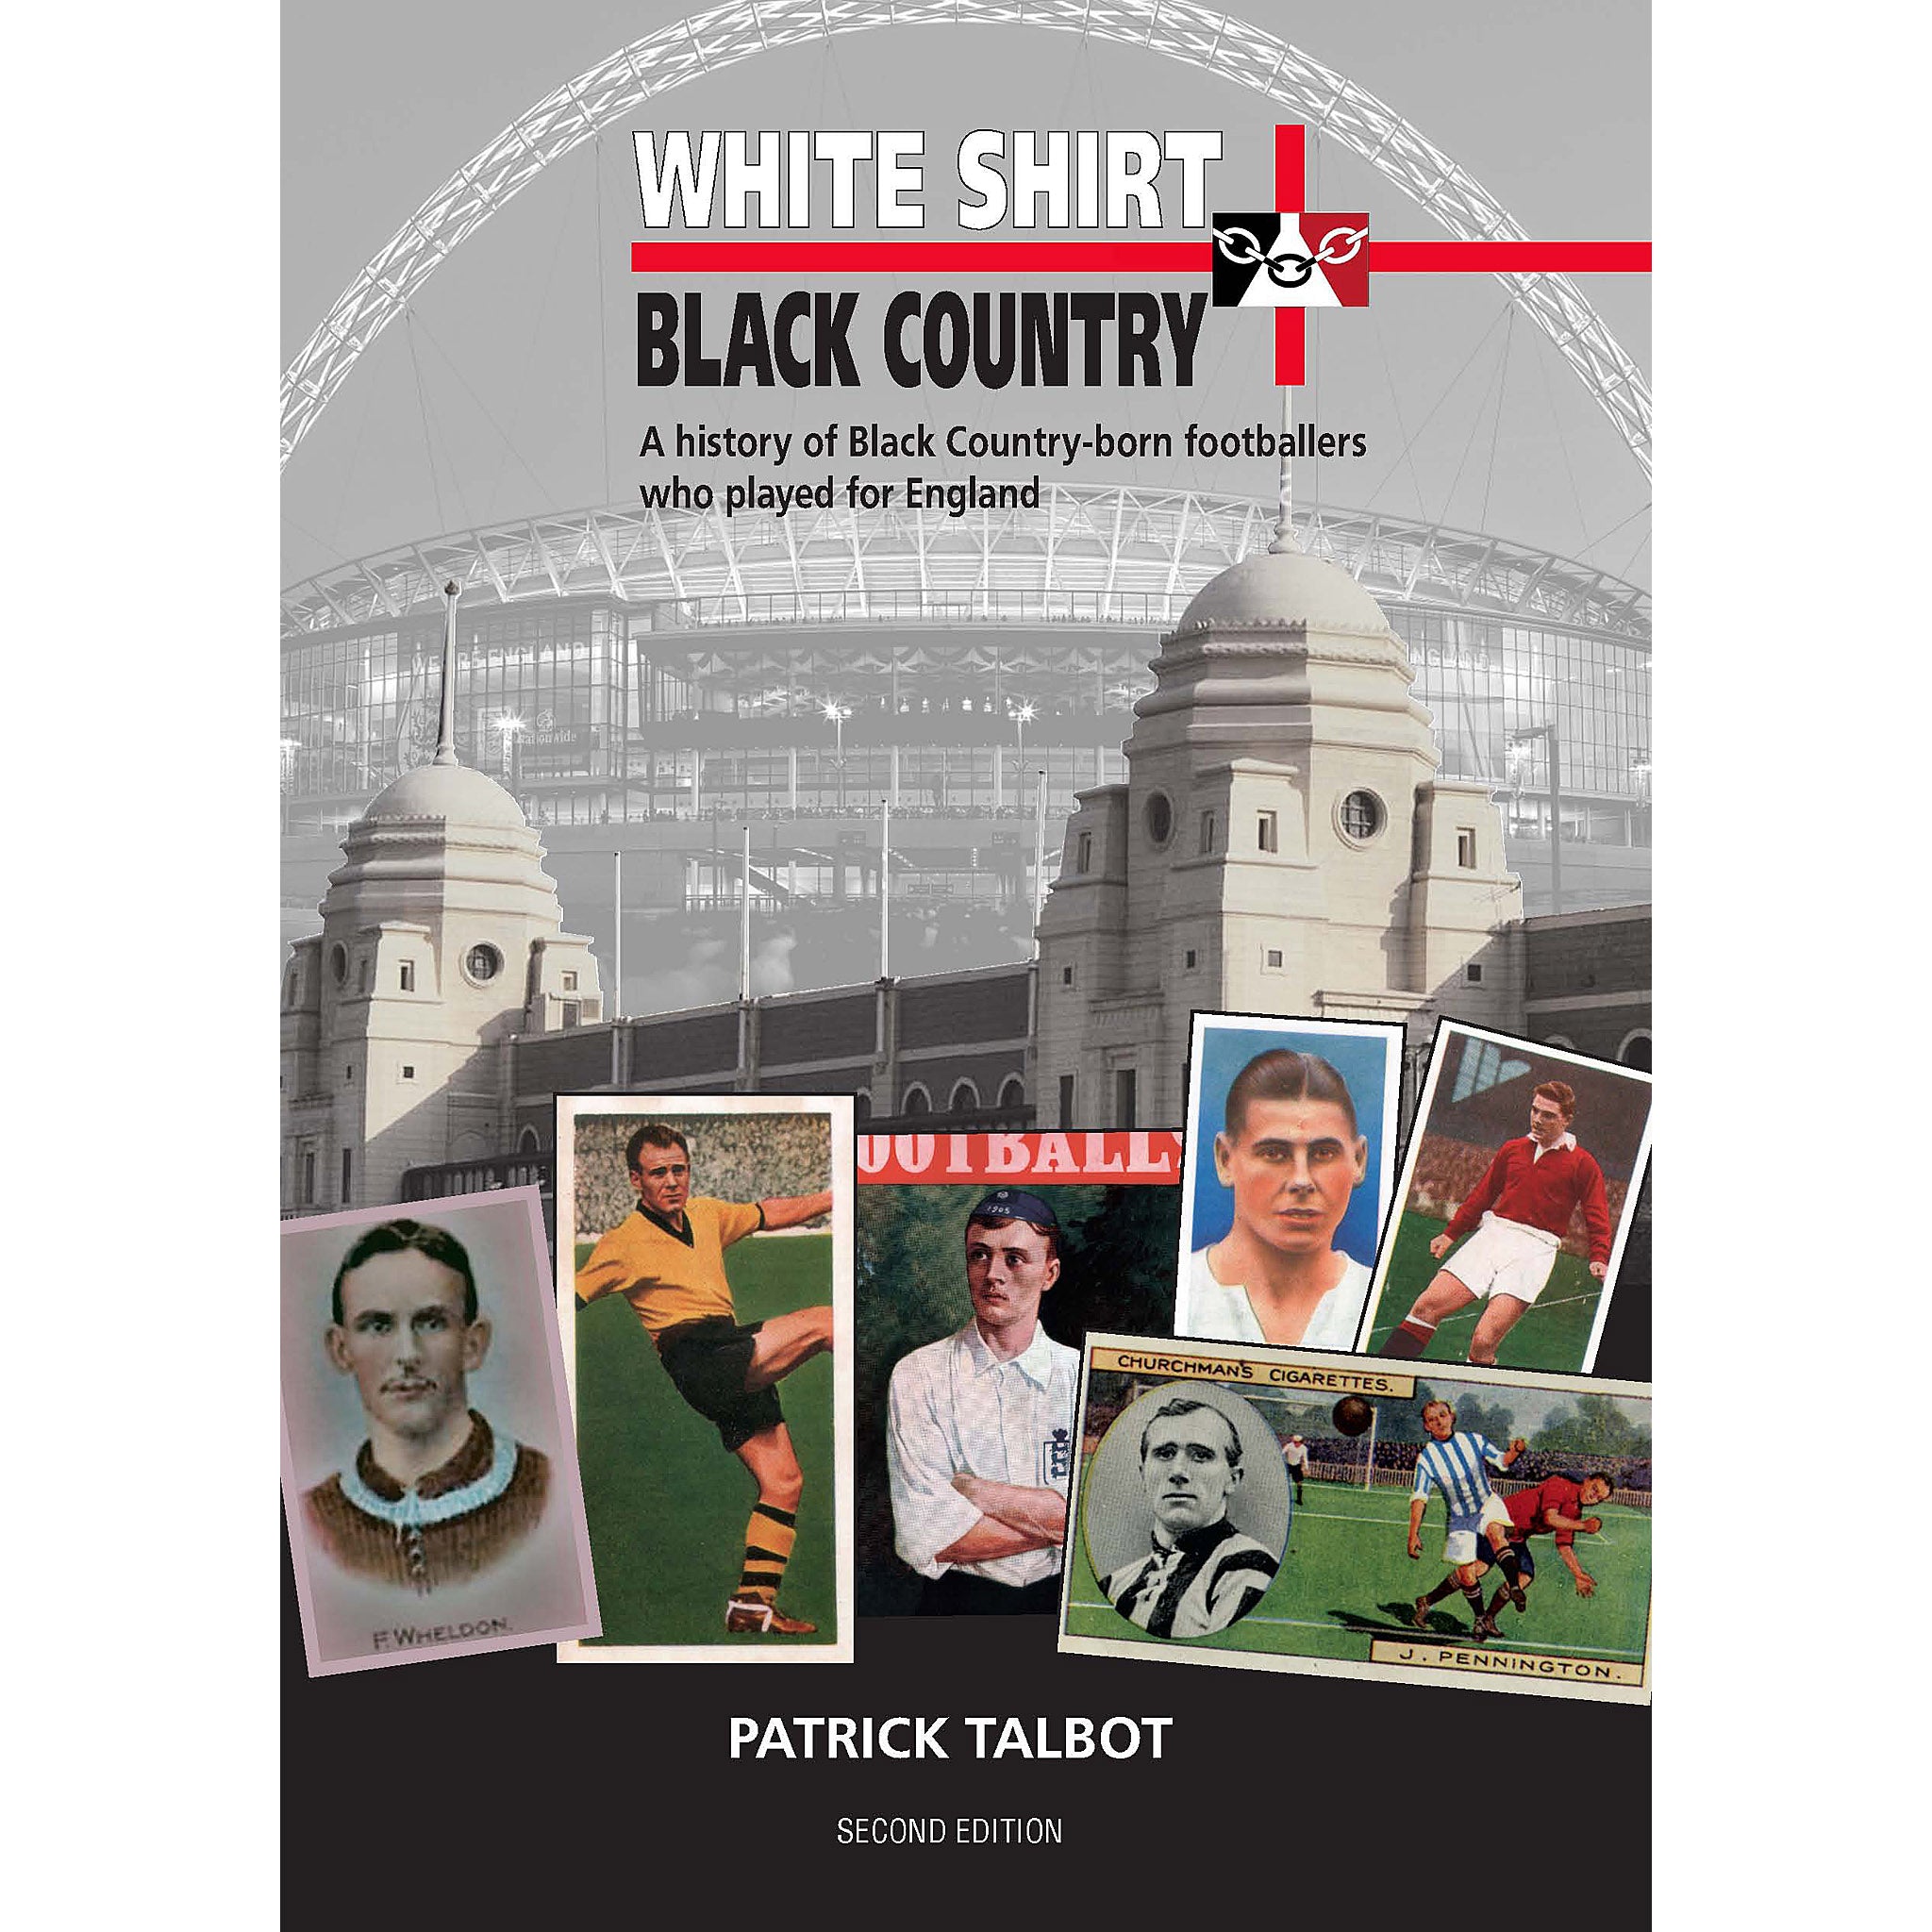 White Shirt, Black Country – A history of Black Country-born footballers who played for England